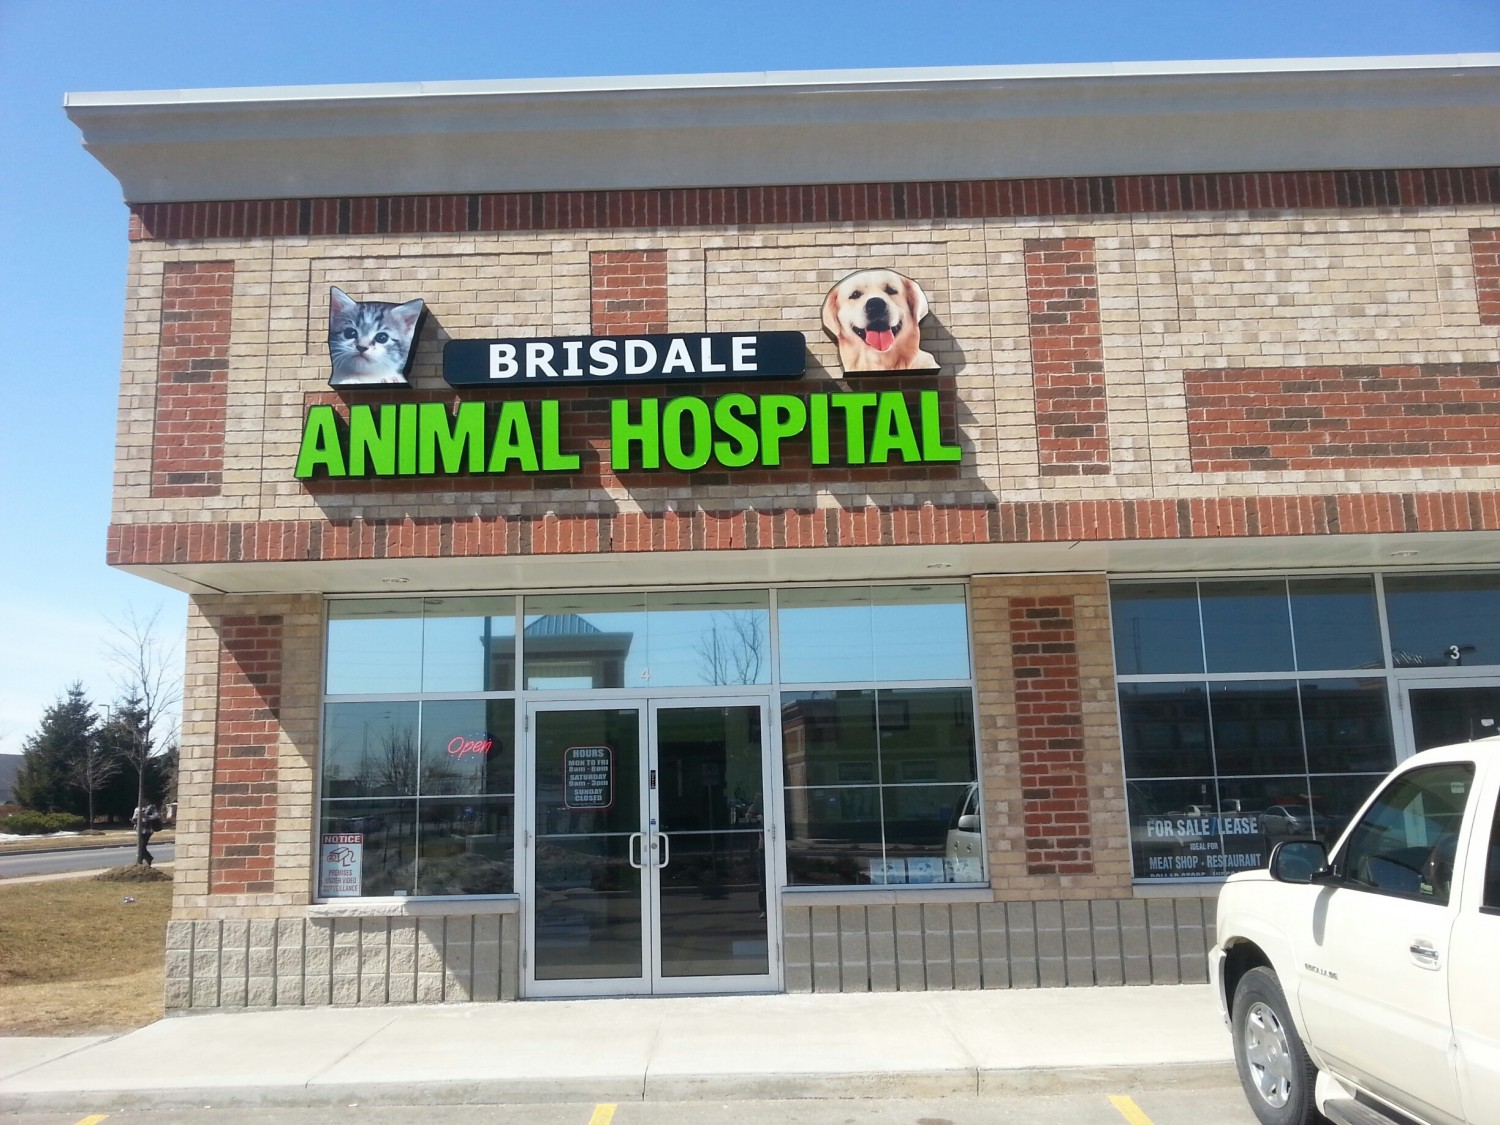 Brisdale Animal Hospital - Veterinarian serving Brampton, Georgetown, Caledon and Mississauga. - Welcome to our site!